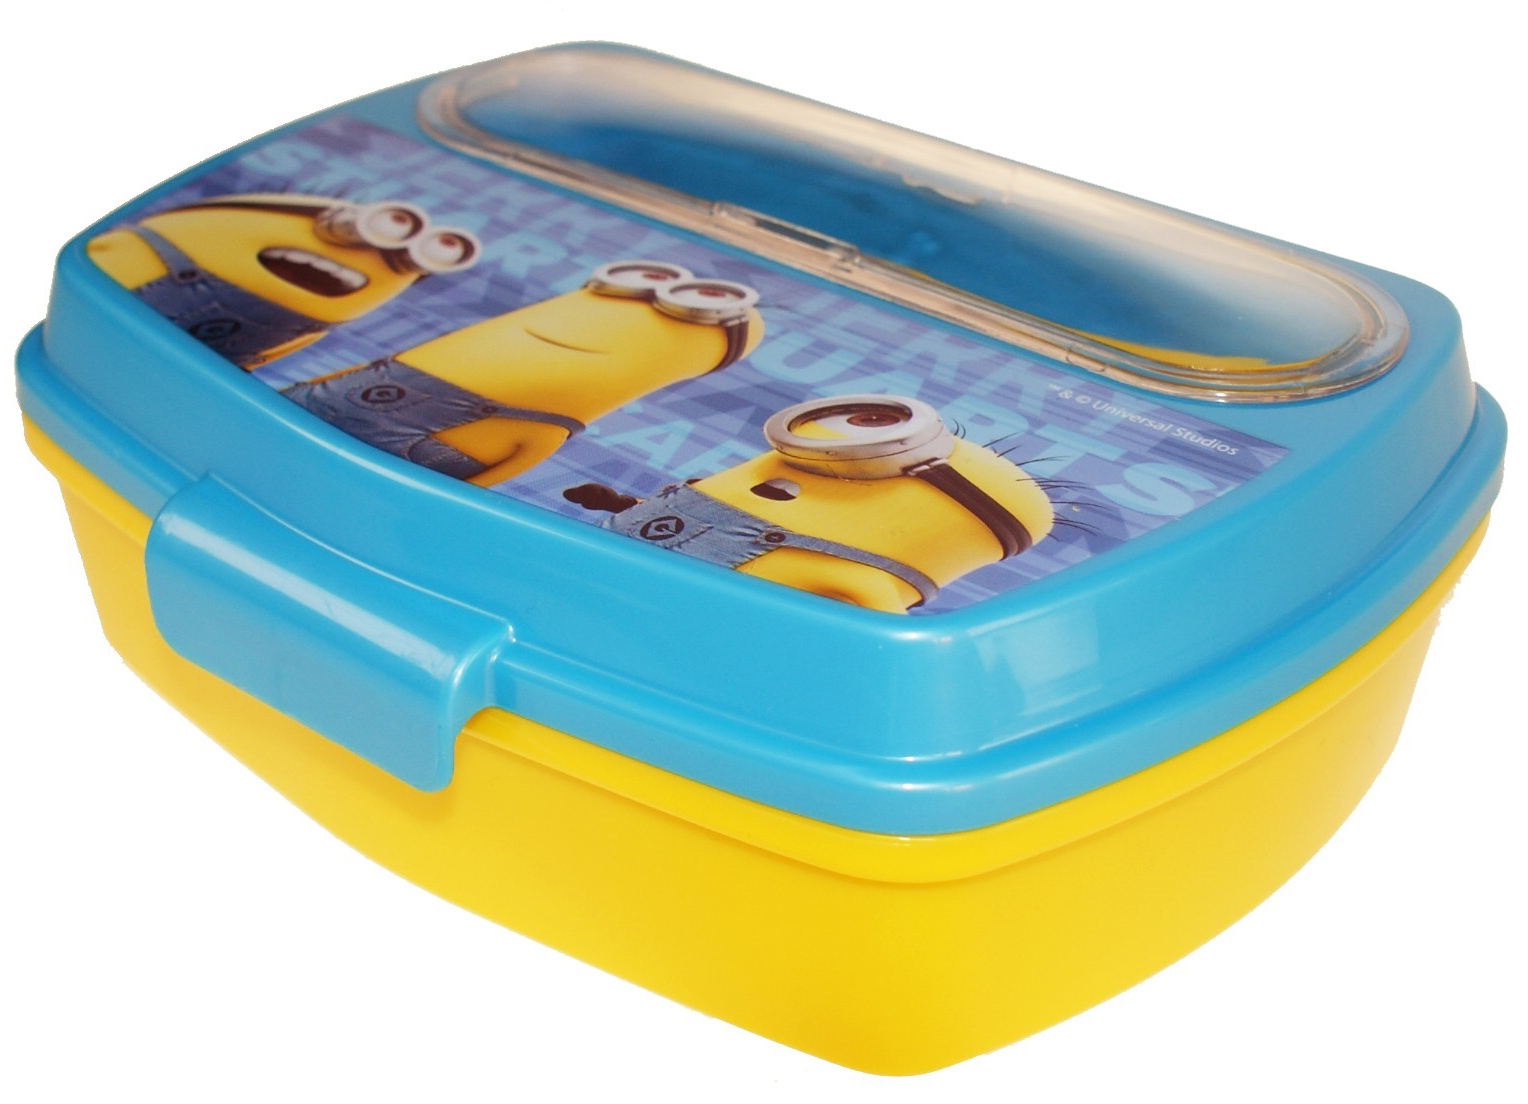 Despicable Me 'Minions' School Sandwich Box with Cutlery Lunch